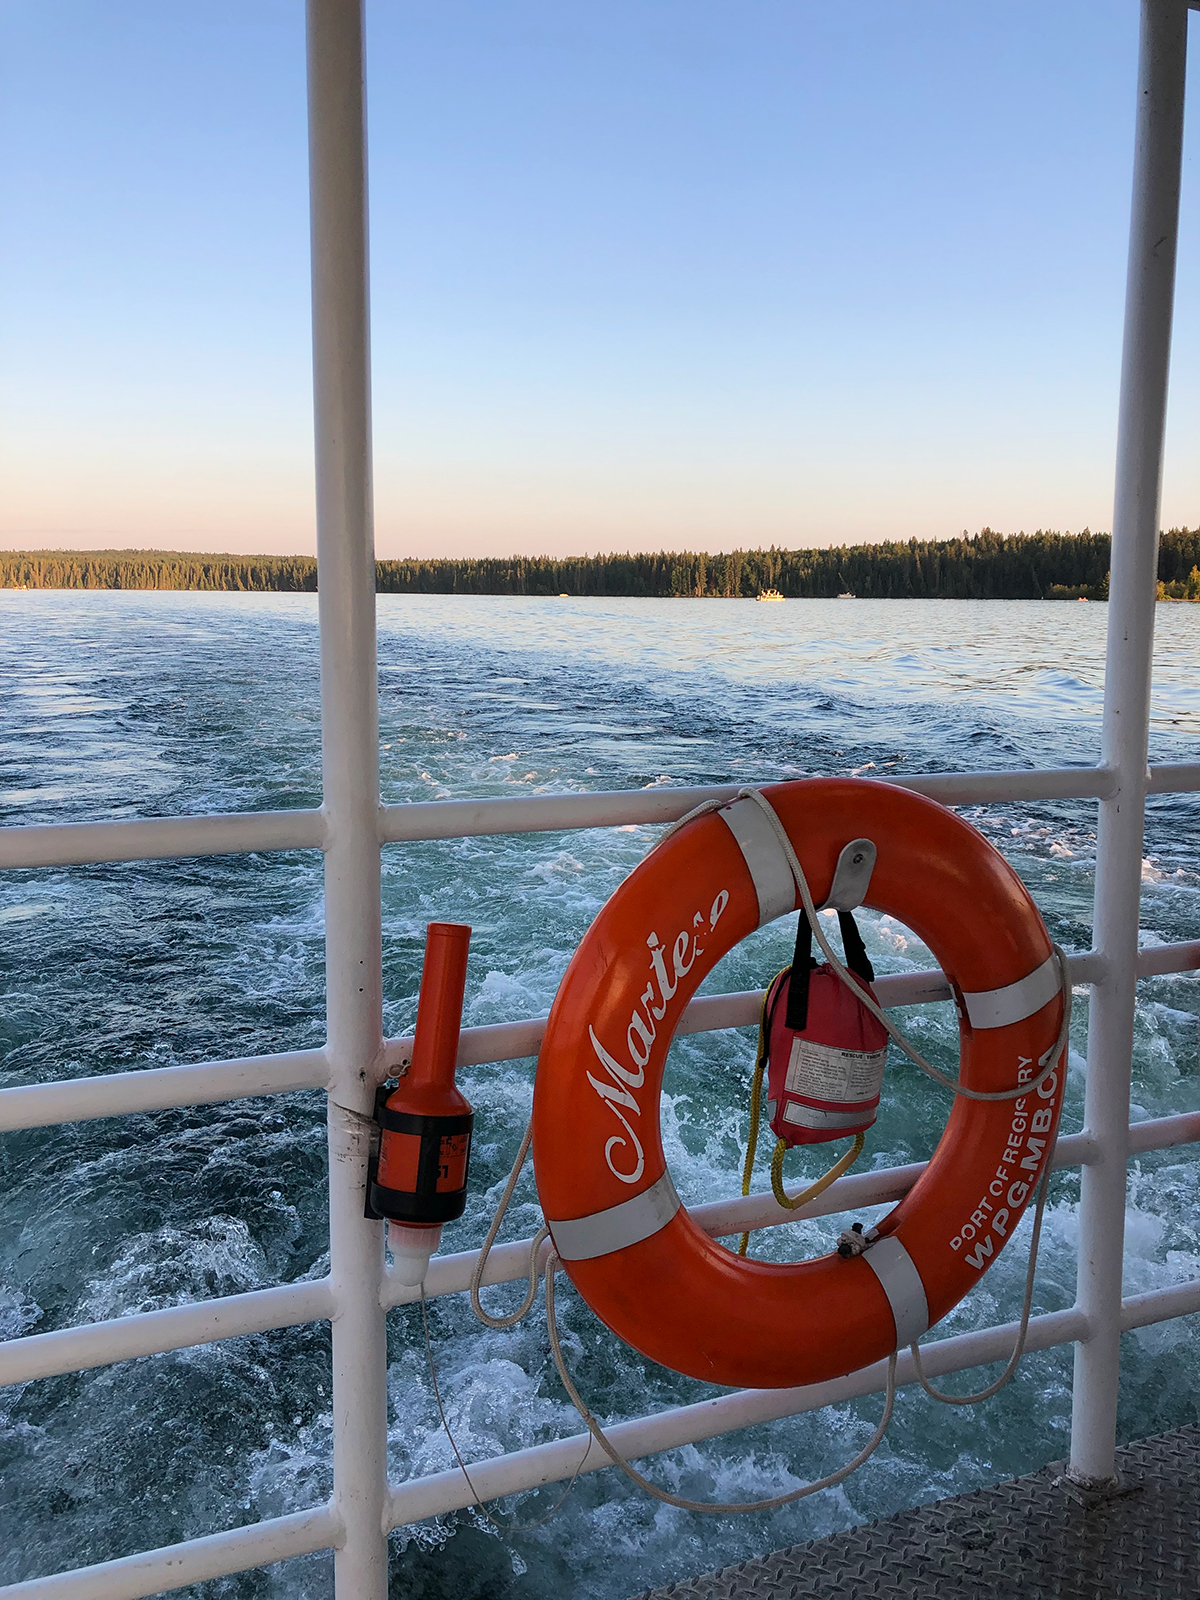 life preserver on boat with water and trees in distance